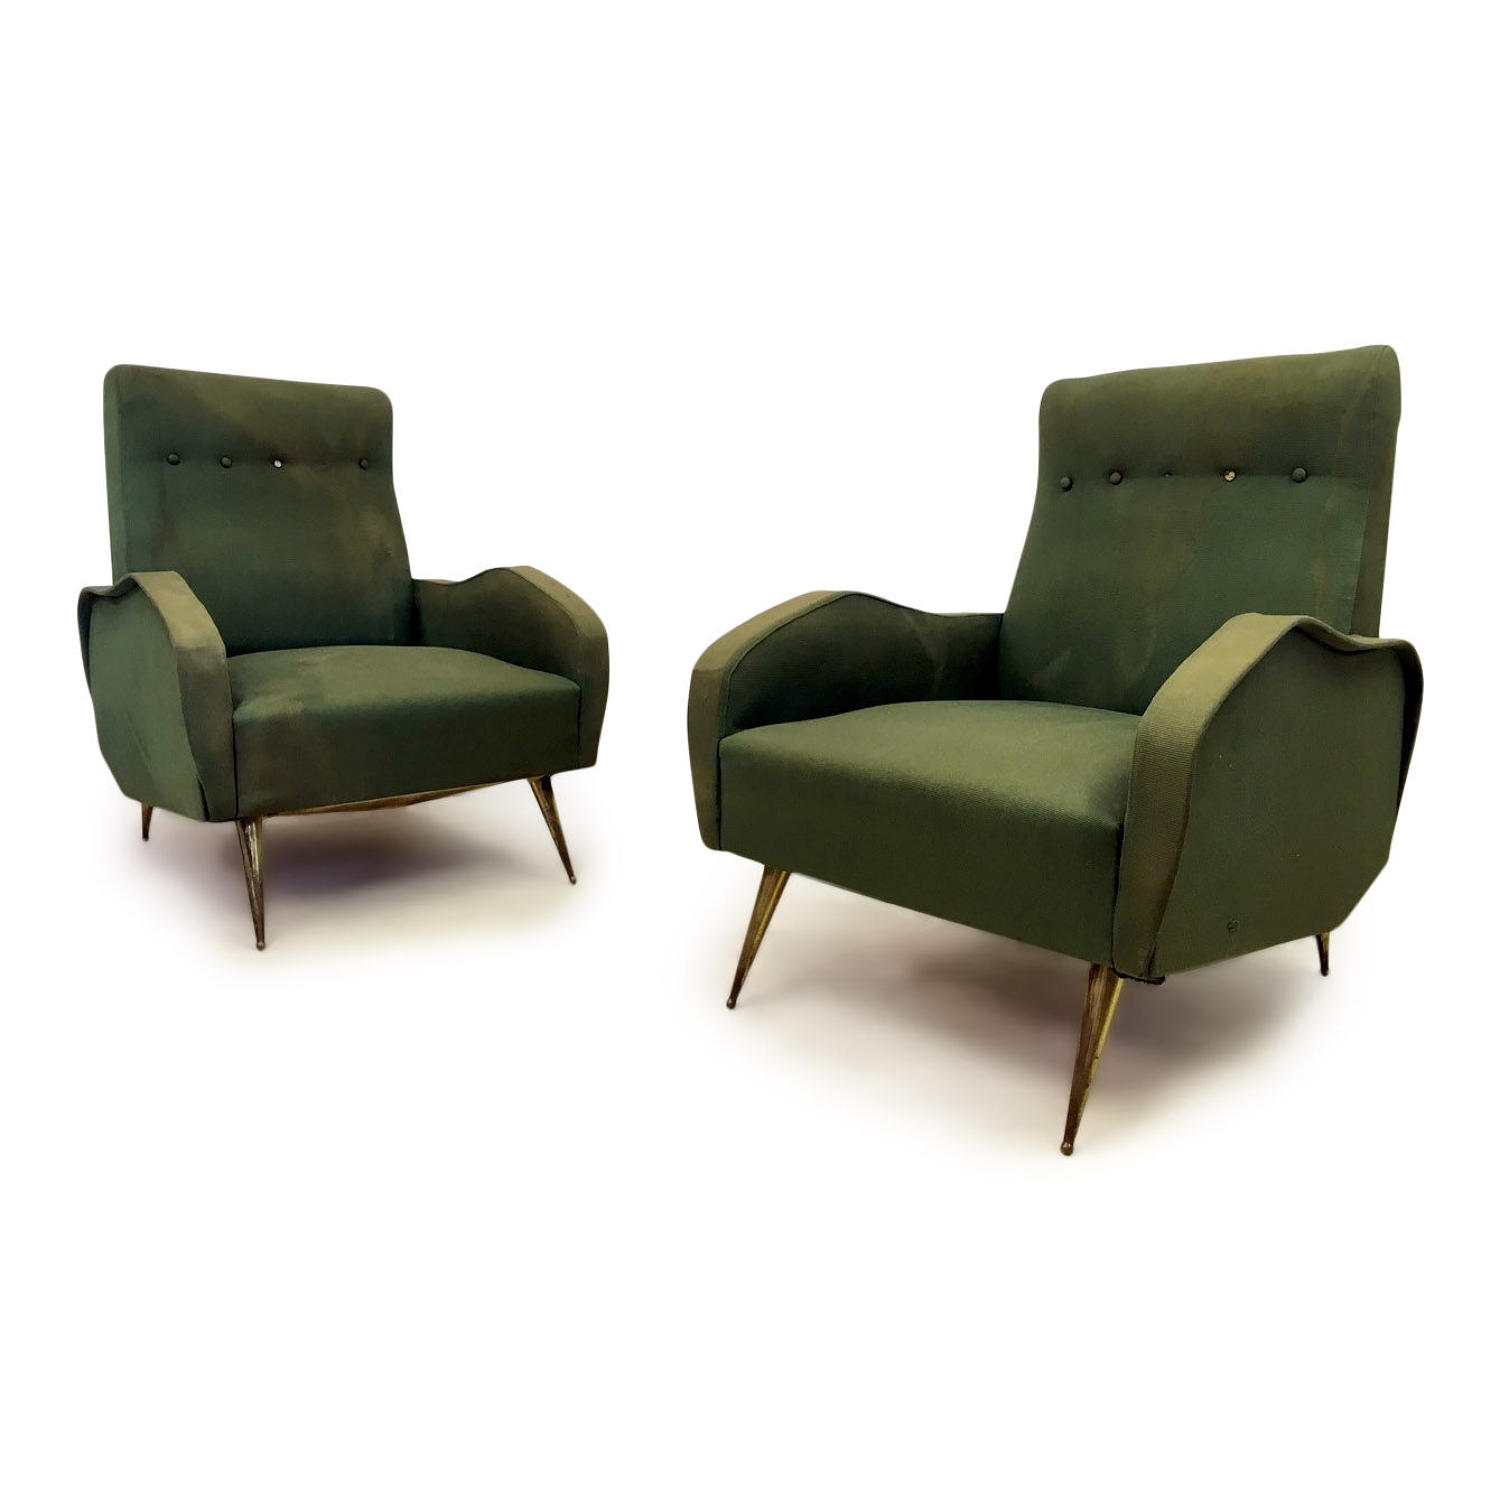 A pair of 1960s Italian armchairs with brass legs